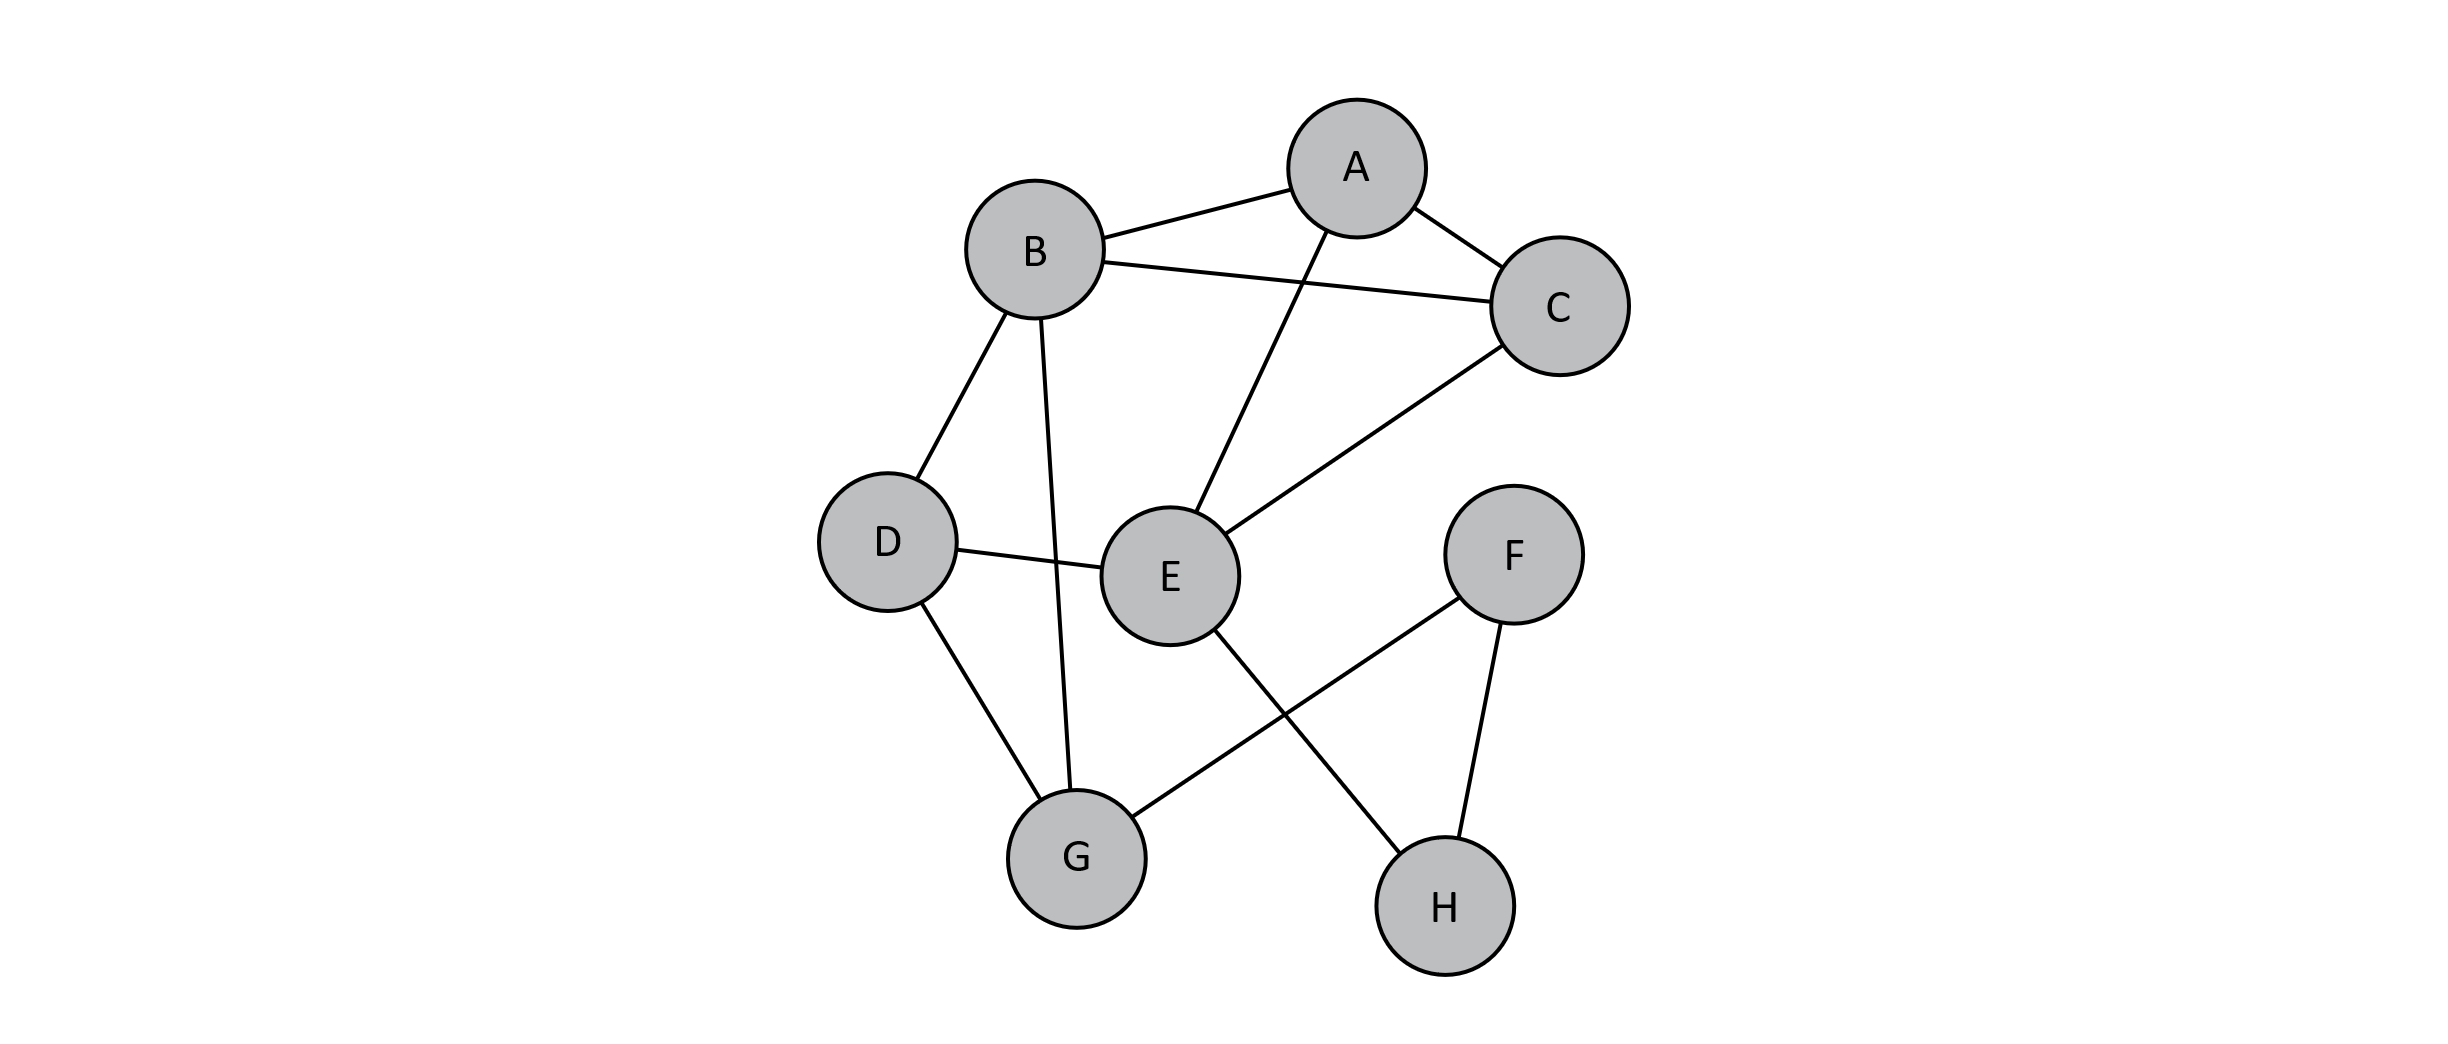 A graph of 8 vertices connected with edges.